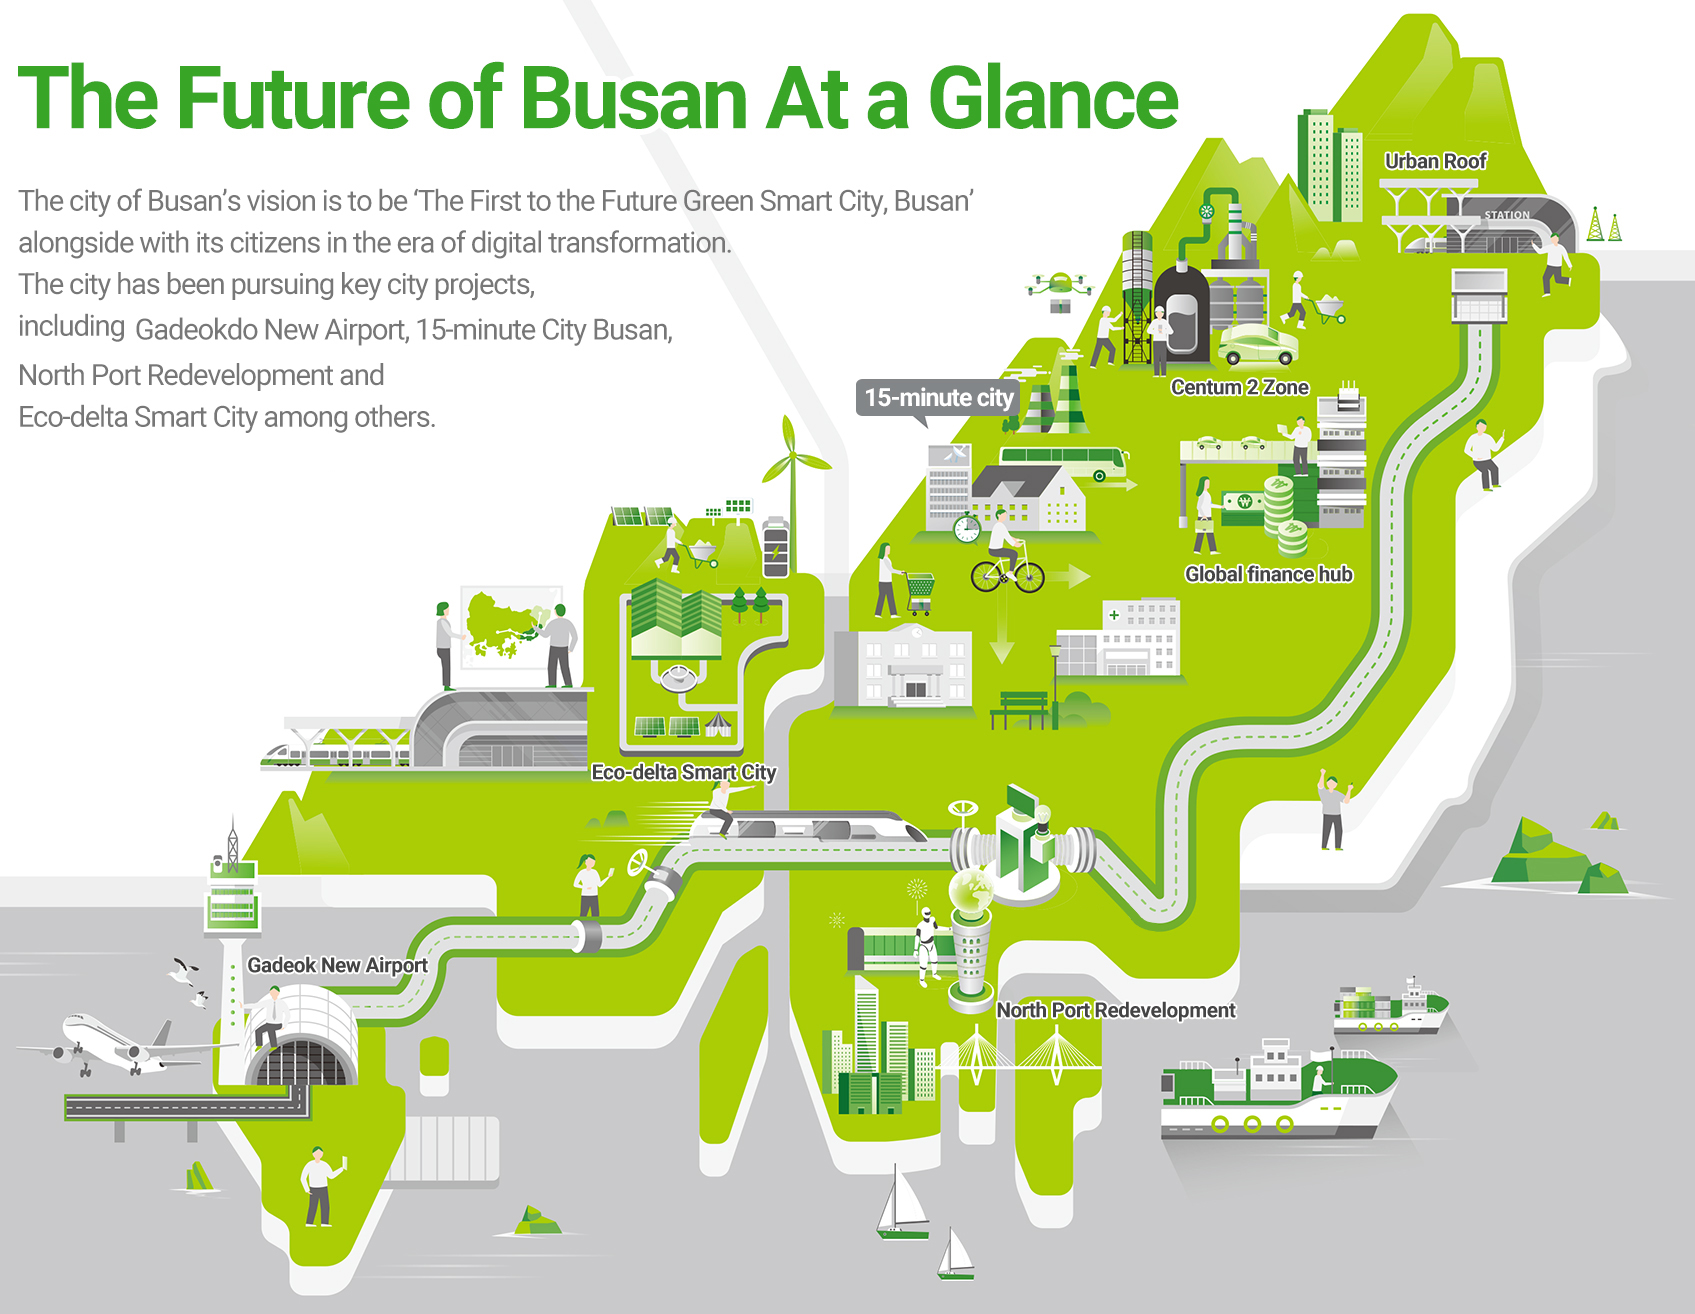 The Future of Busan At a Glance 
    The city of Busan’s vision is to be ‘The First to the Future Green Smart City, Busan’ alongside with its citizens in the era of digital transformation. The city has been pursuing key city projects, including 2030 World Expo Busan, Korea, Gadeokdo New Airport, 15-minute City Busan, North Port Redevelopment and Eco-delta Smart City among others.
    Urban Roof, Centum 2 Zone, 15-minute city, Global finance hub, Eco-delta Smart City, Bu-Ul-Gyeong Supra-regional Economic Alliance, 2030 World Expo, Gadeok New Airport, North Port Redevelopment